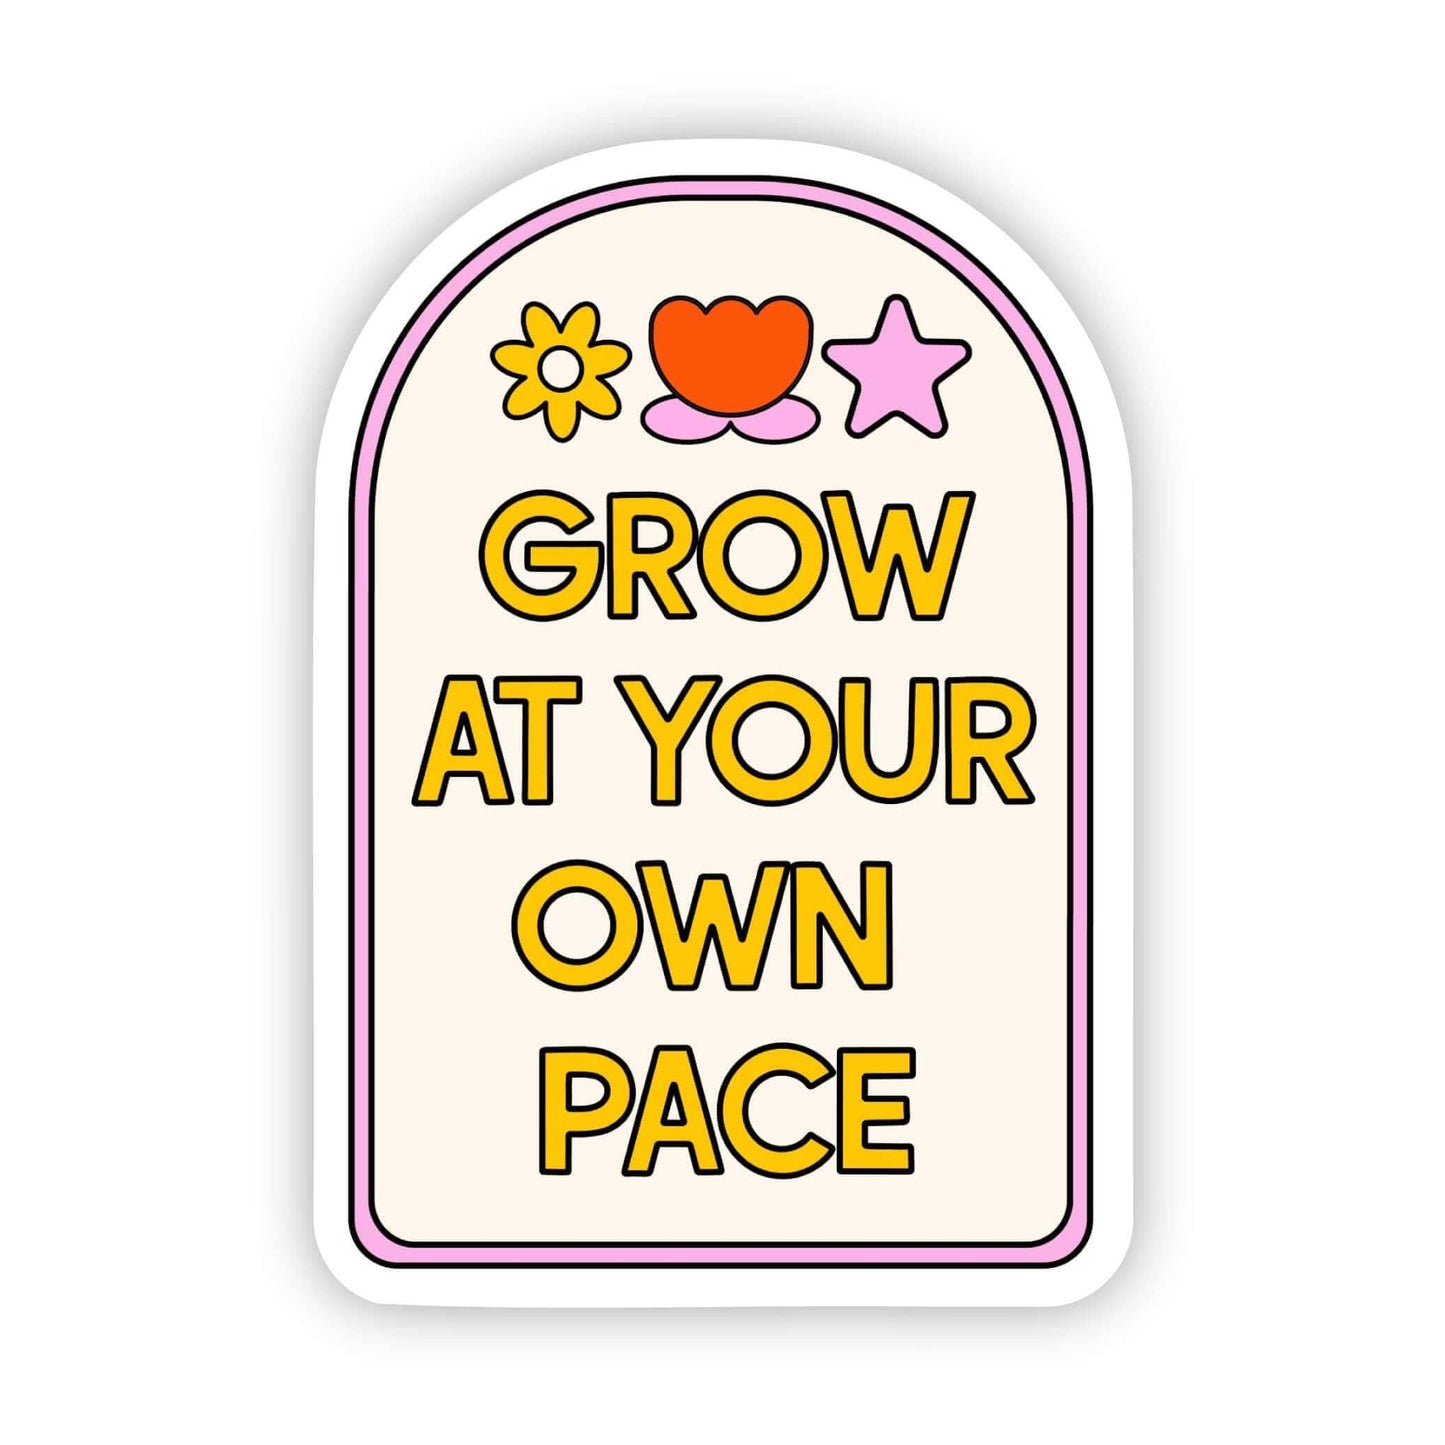 Grow at your own pace sticker